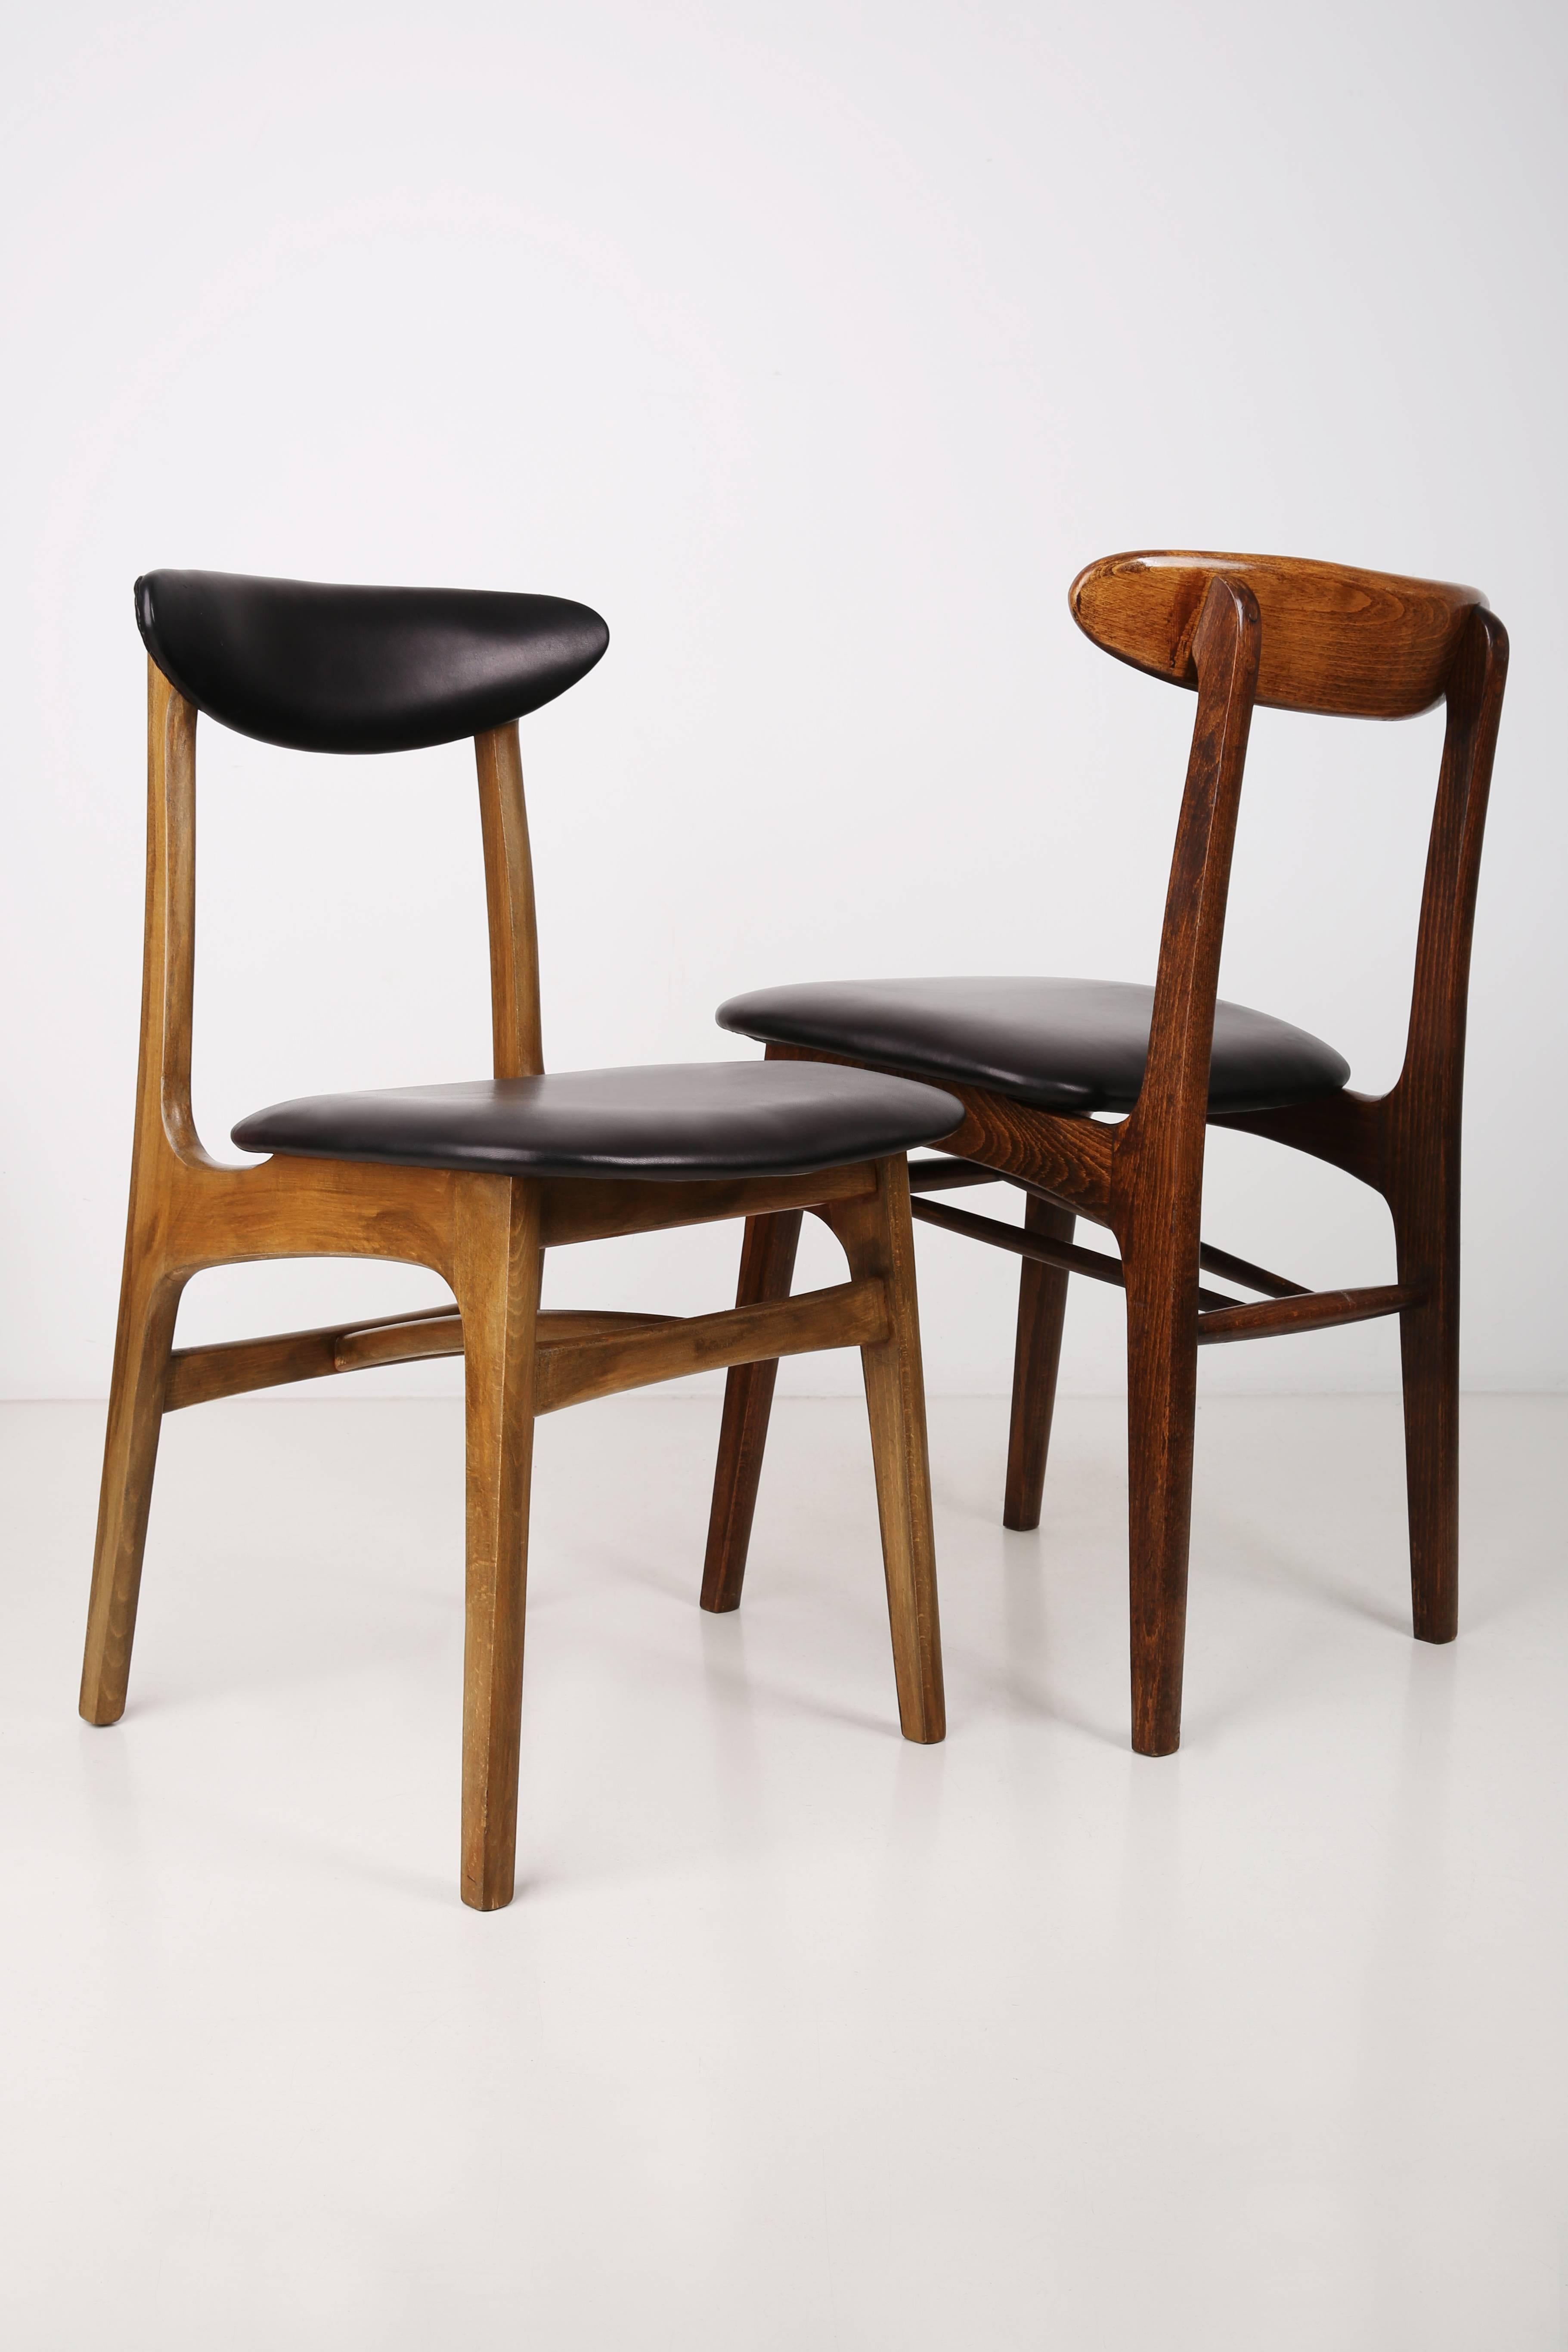 Hand-Crafted Set of Two Leather Mid Century Black Chairs, Europe, 1960s For Sale